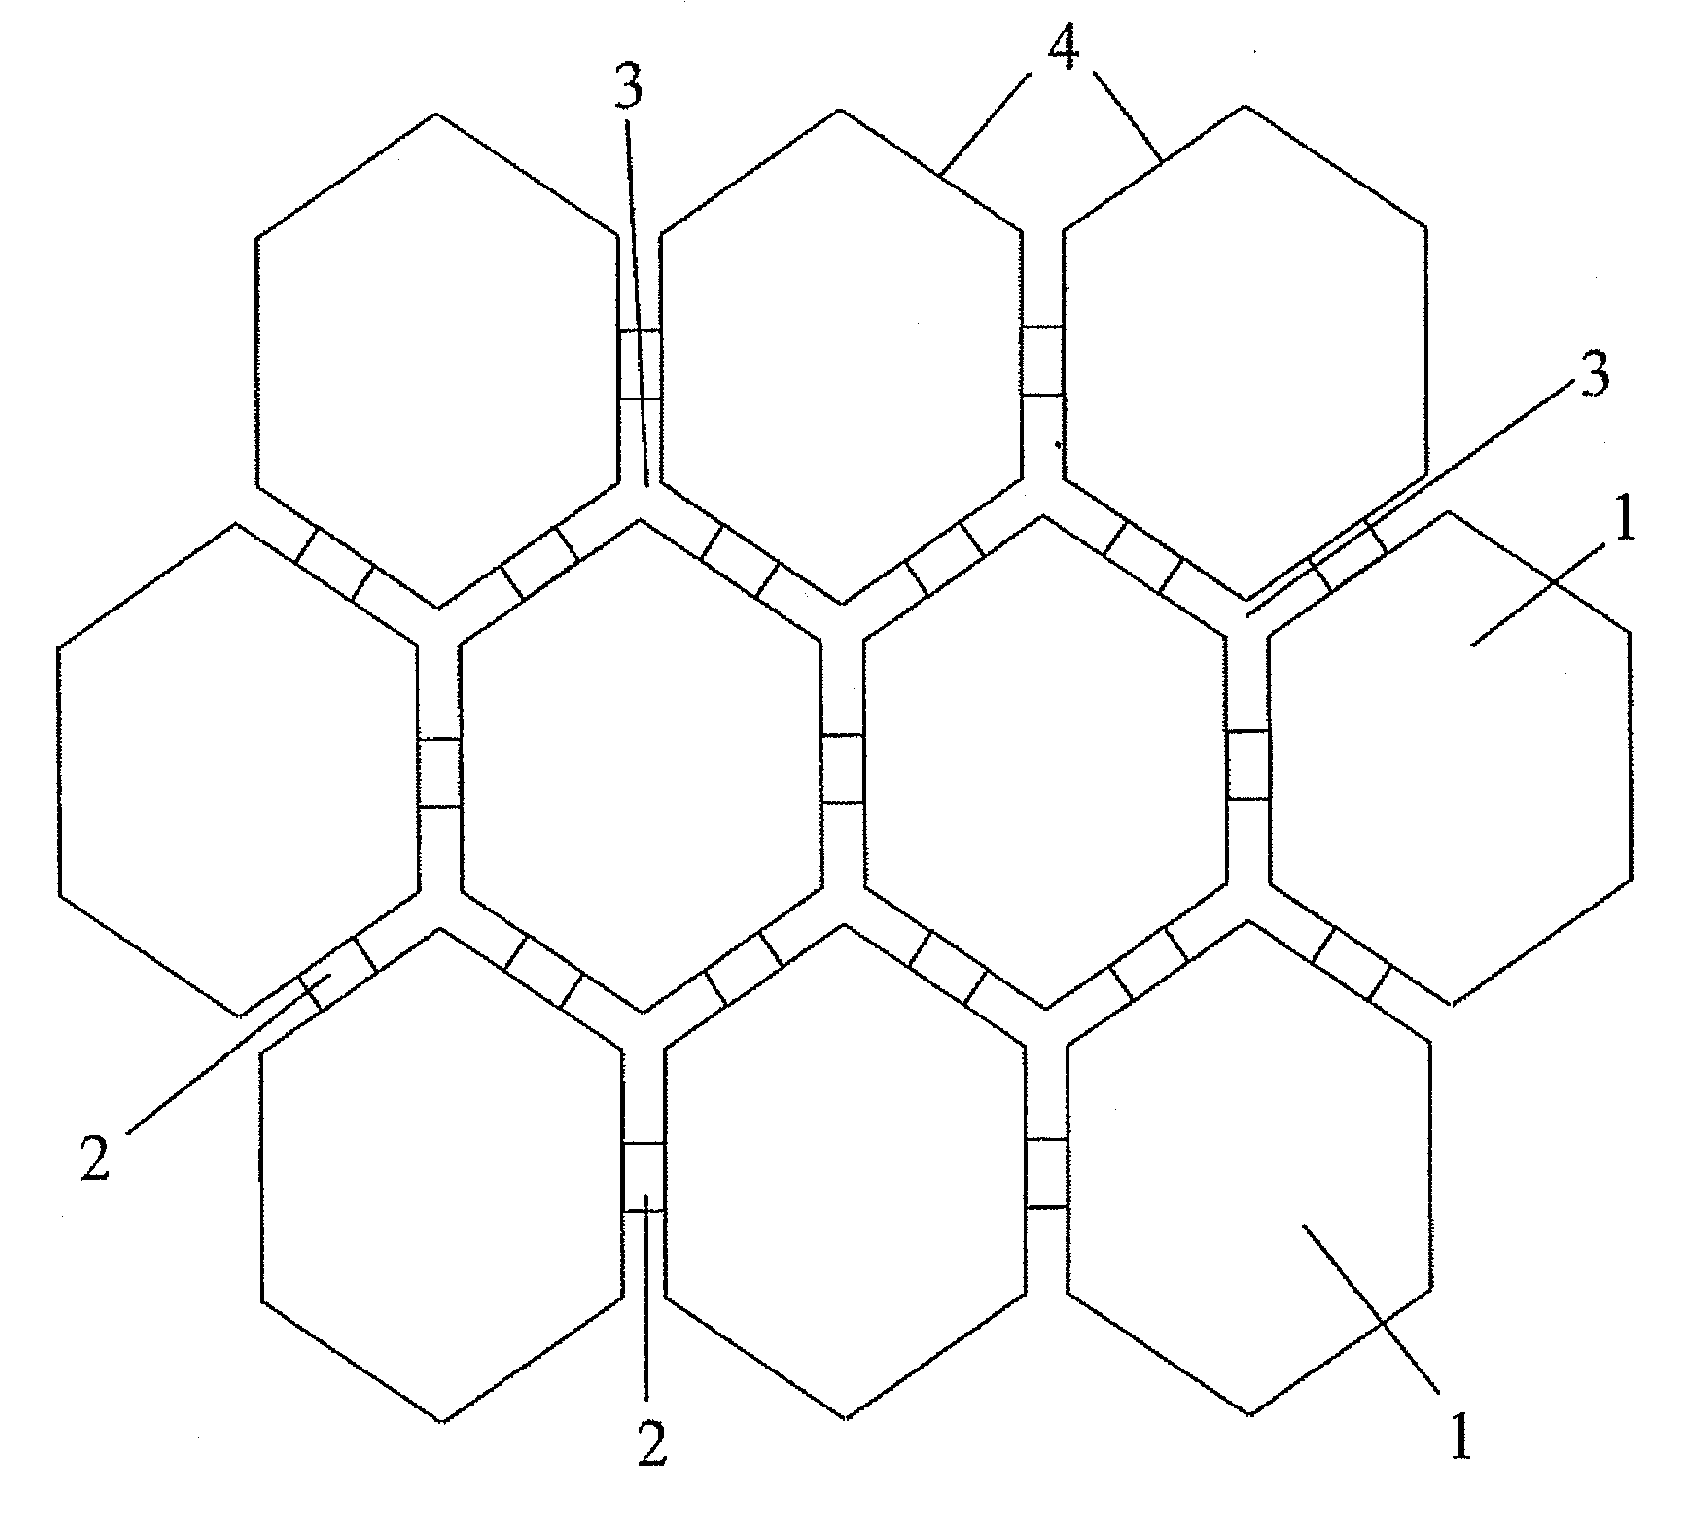 Method for Manufacturing a Three-Dimensionally Deformable, Sheet-Like Refinforcing Structure